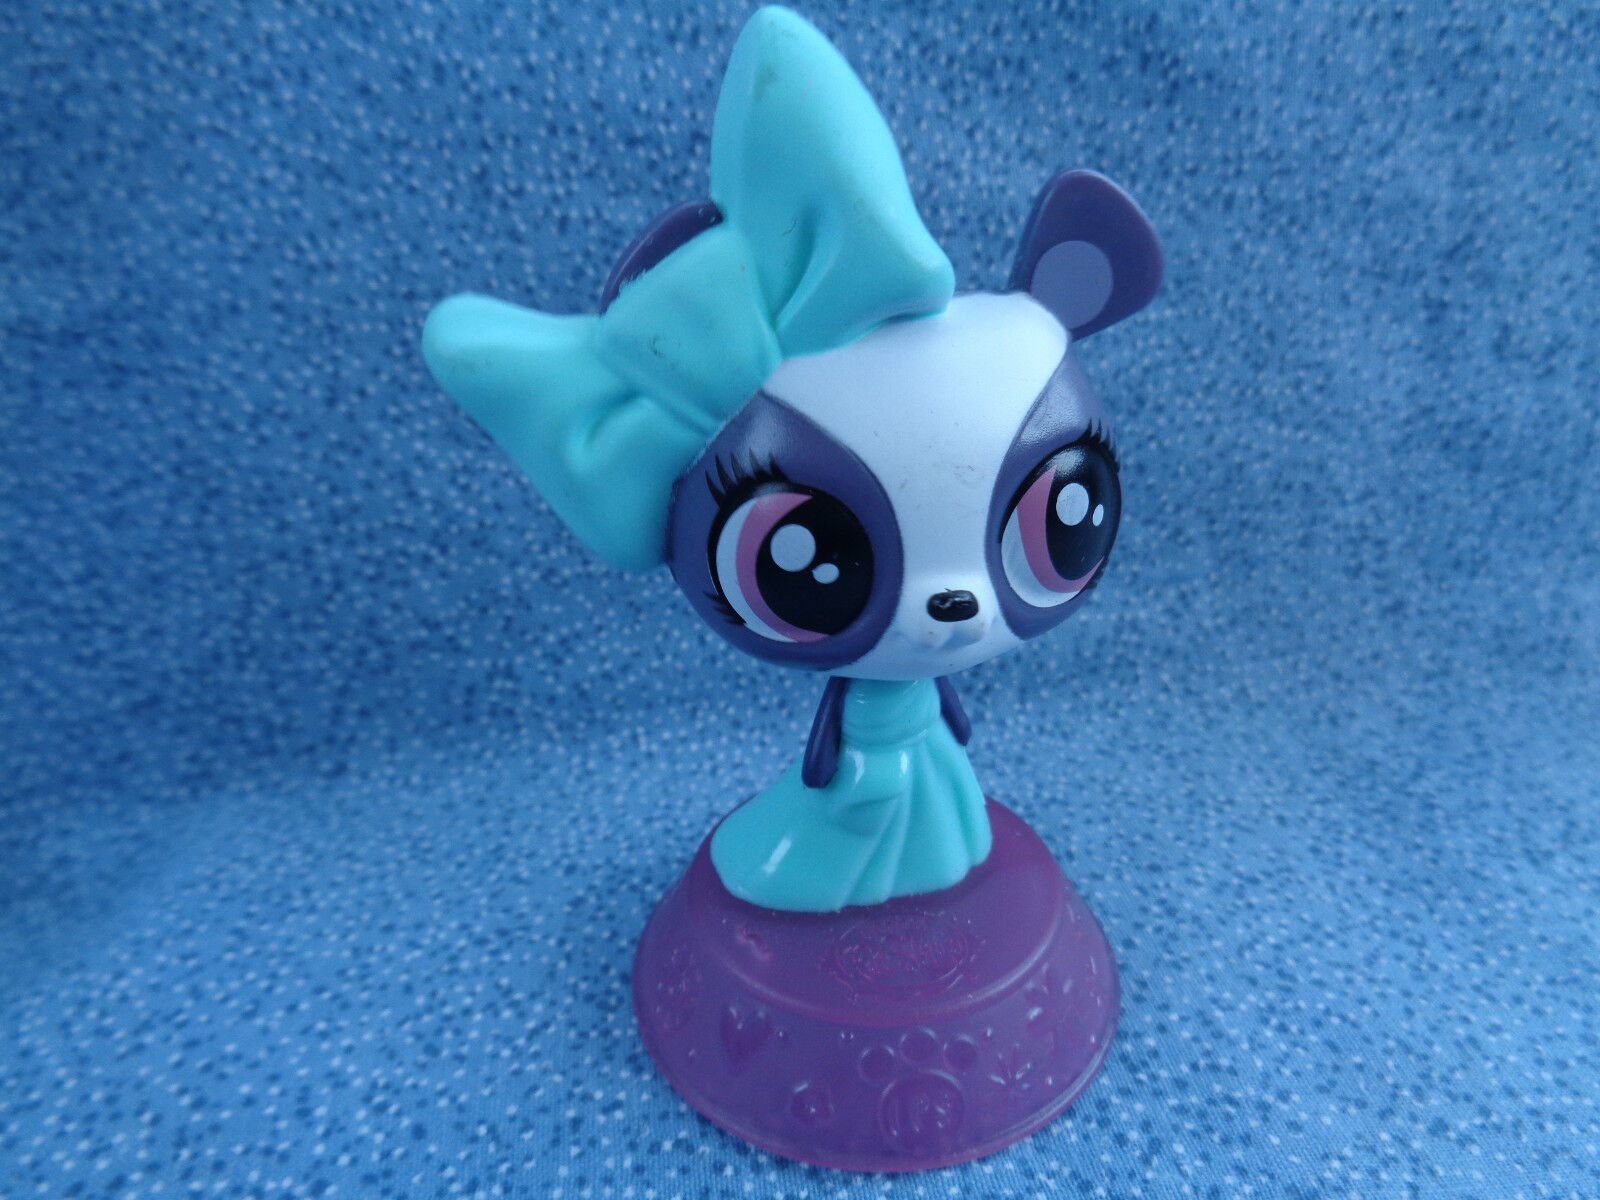 Primary image for 2014 McDonald's Littlest Pets Shop Penny Ling Bobble Head Toy 3 1/2"